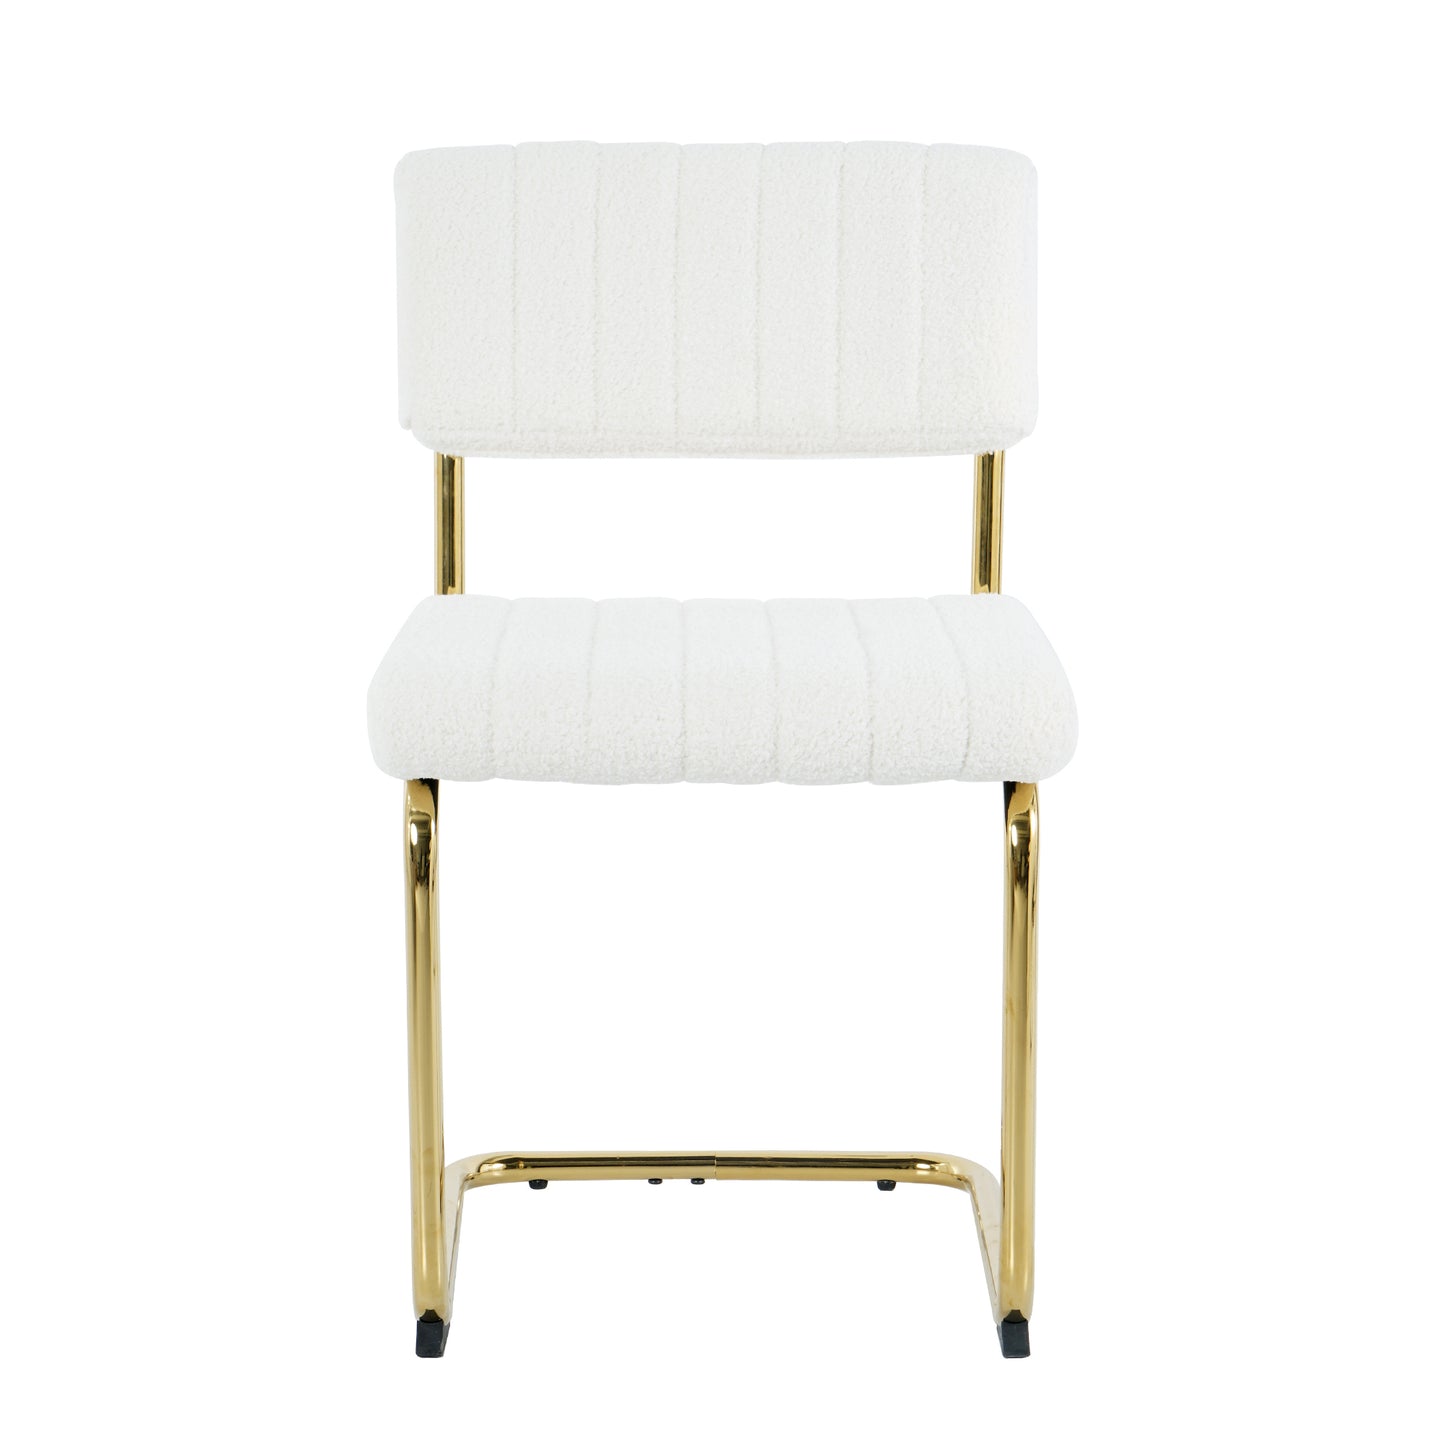 Modern Luxury Dining Chairs (set of 2)